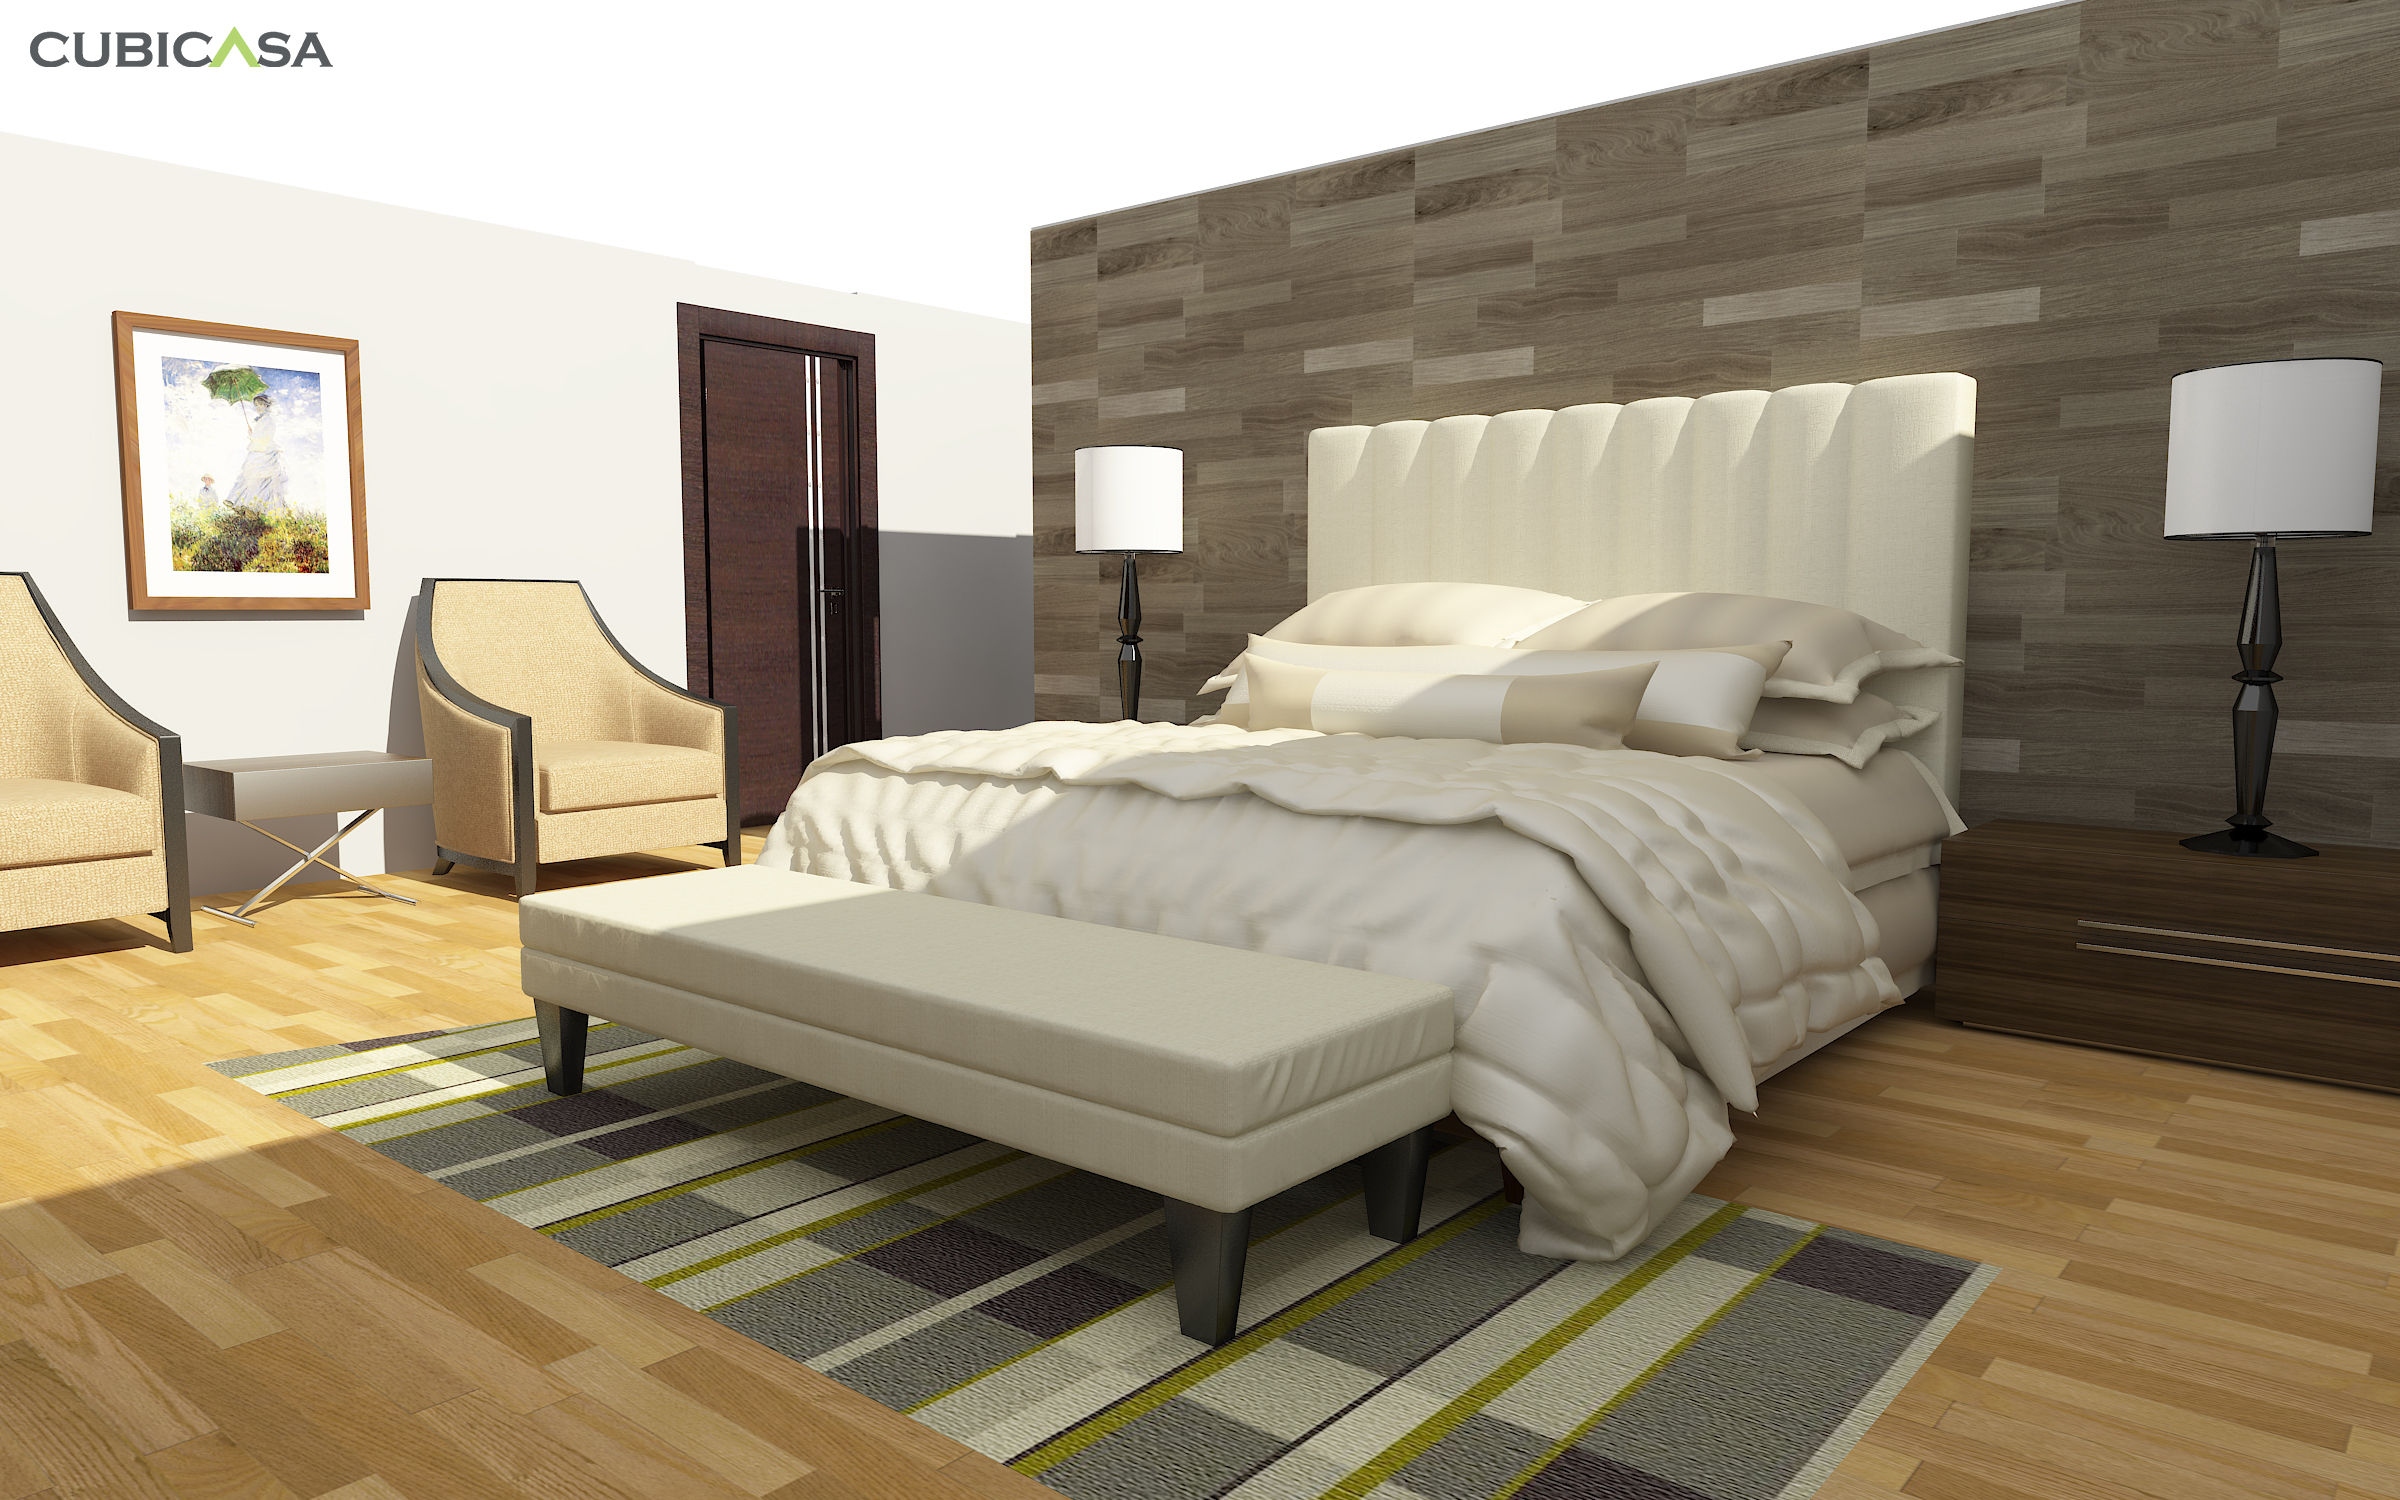 106-Basement-3D Premium-Furnished-Bedroom-We Get Around CubiCasa Luxury+Residential+Real+Estate+Example.jpg